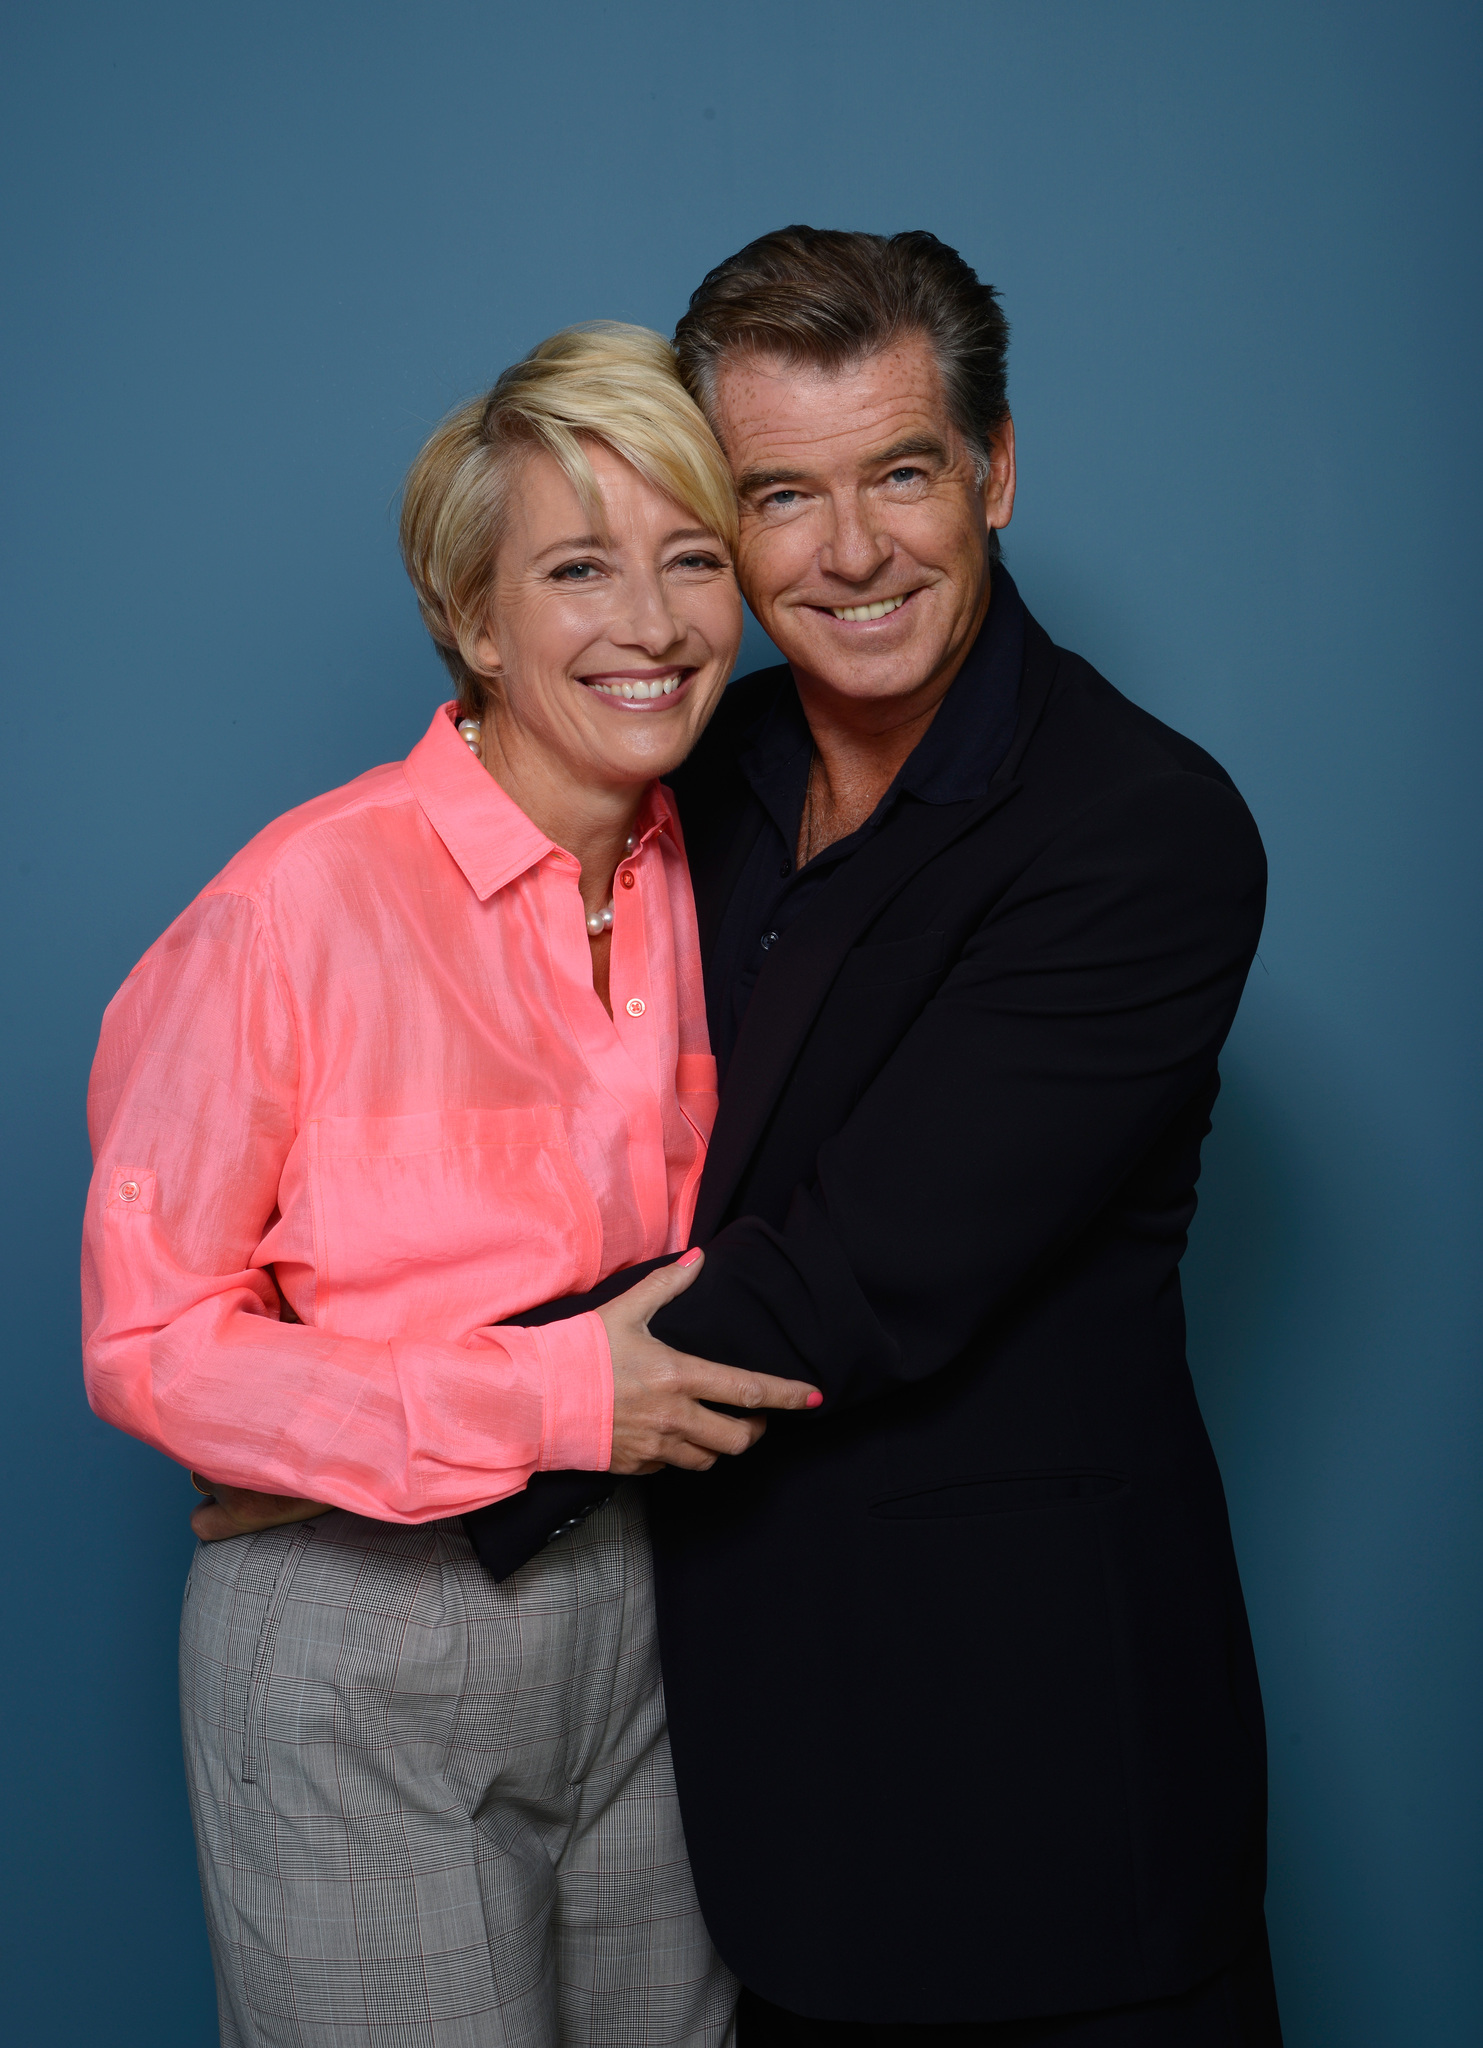 Pierce Brosnan and Emma Thompson at an event for The Love Punch (2013)